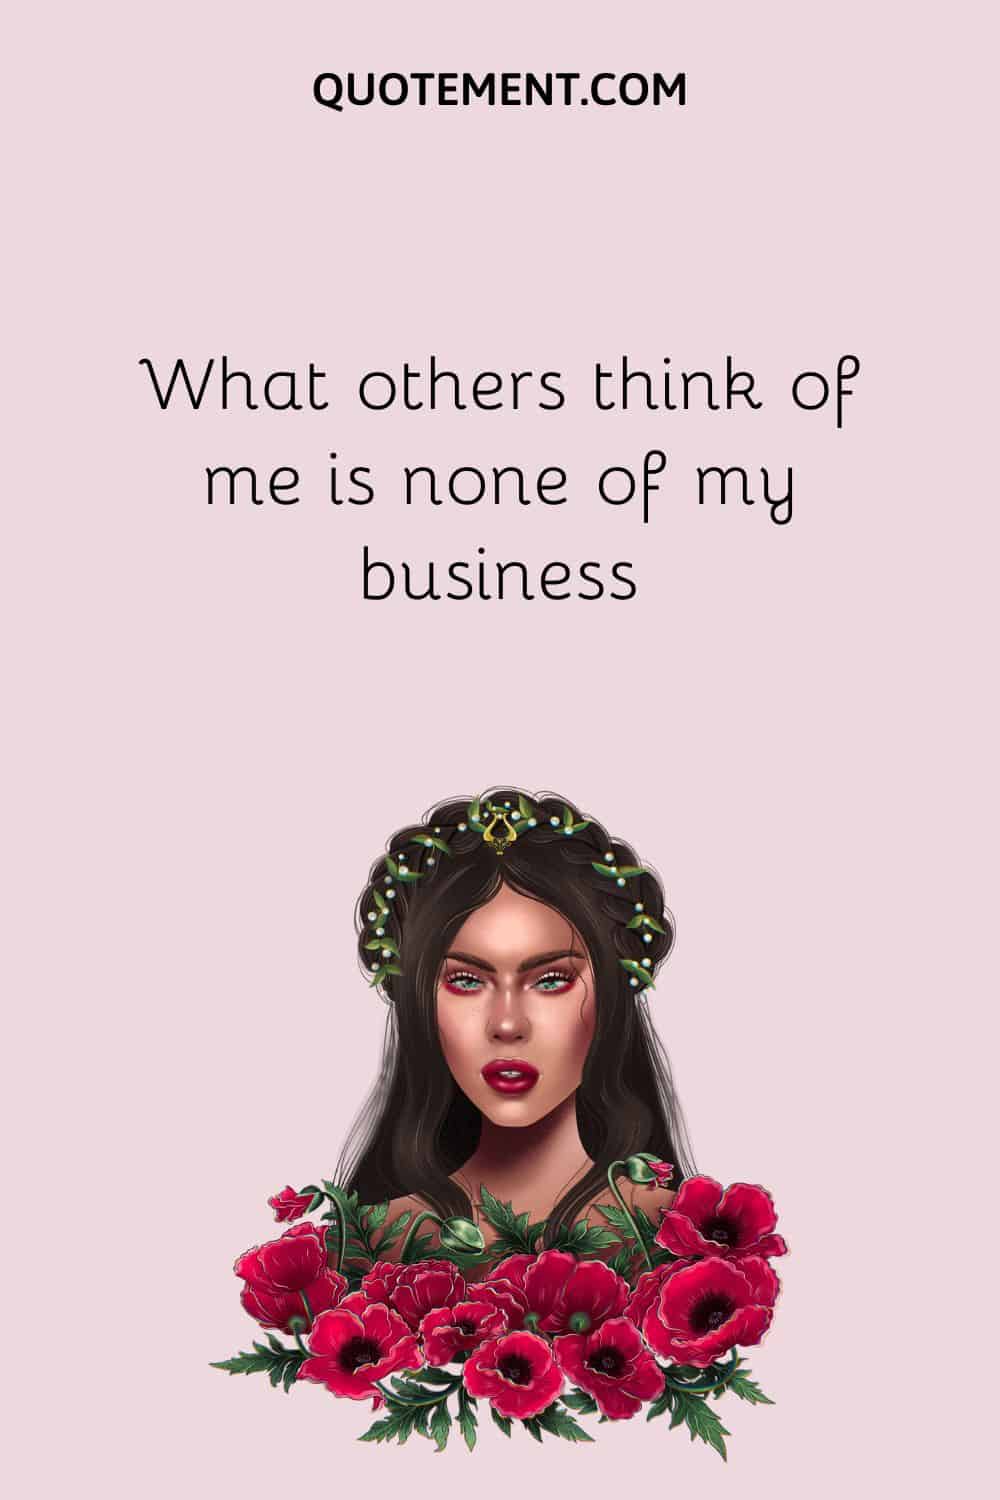 What others think of me is none of my business